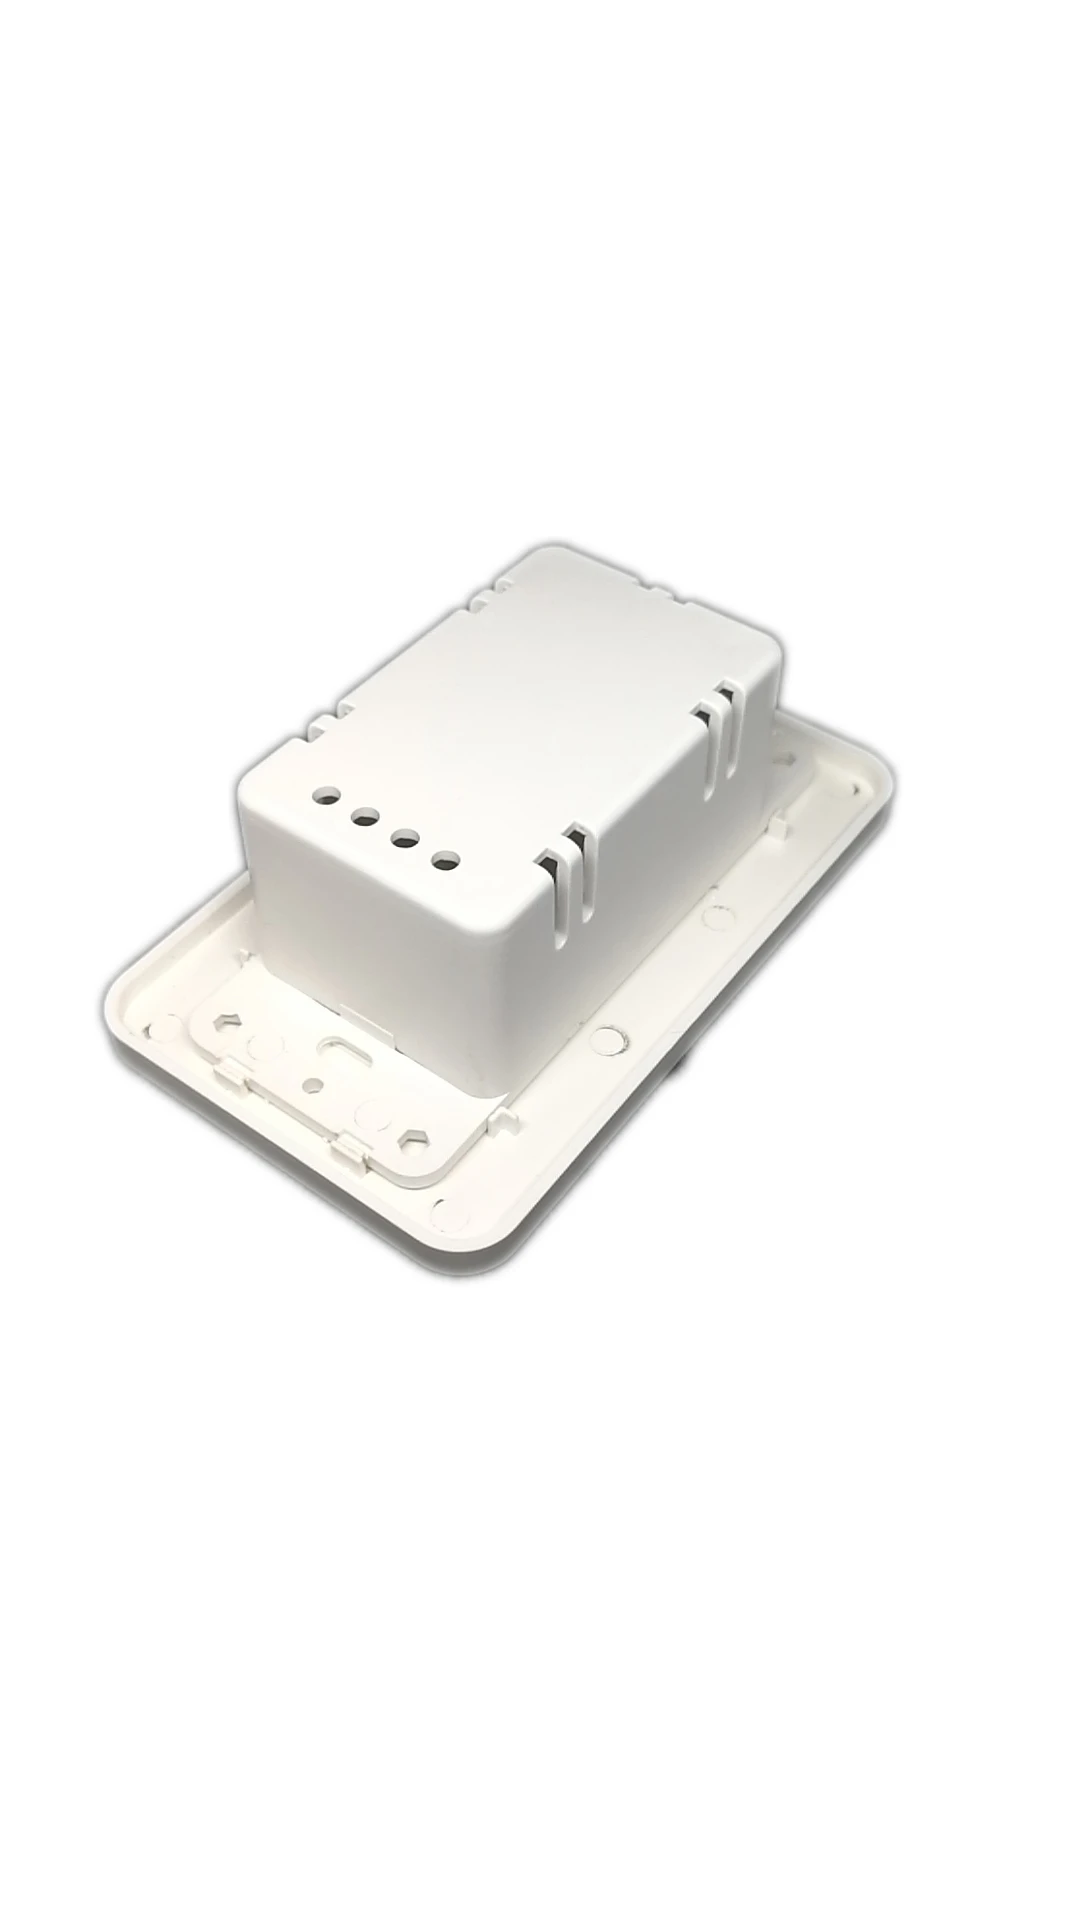 American Standard Intelligent Dimmer Switch Housing Case Kit With Touch Panel